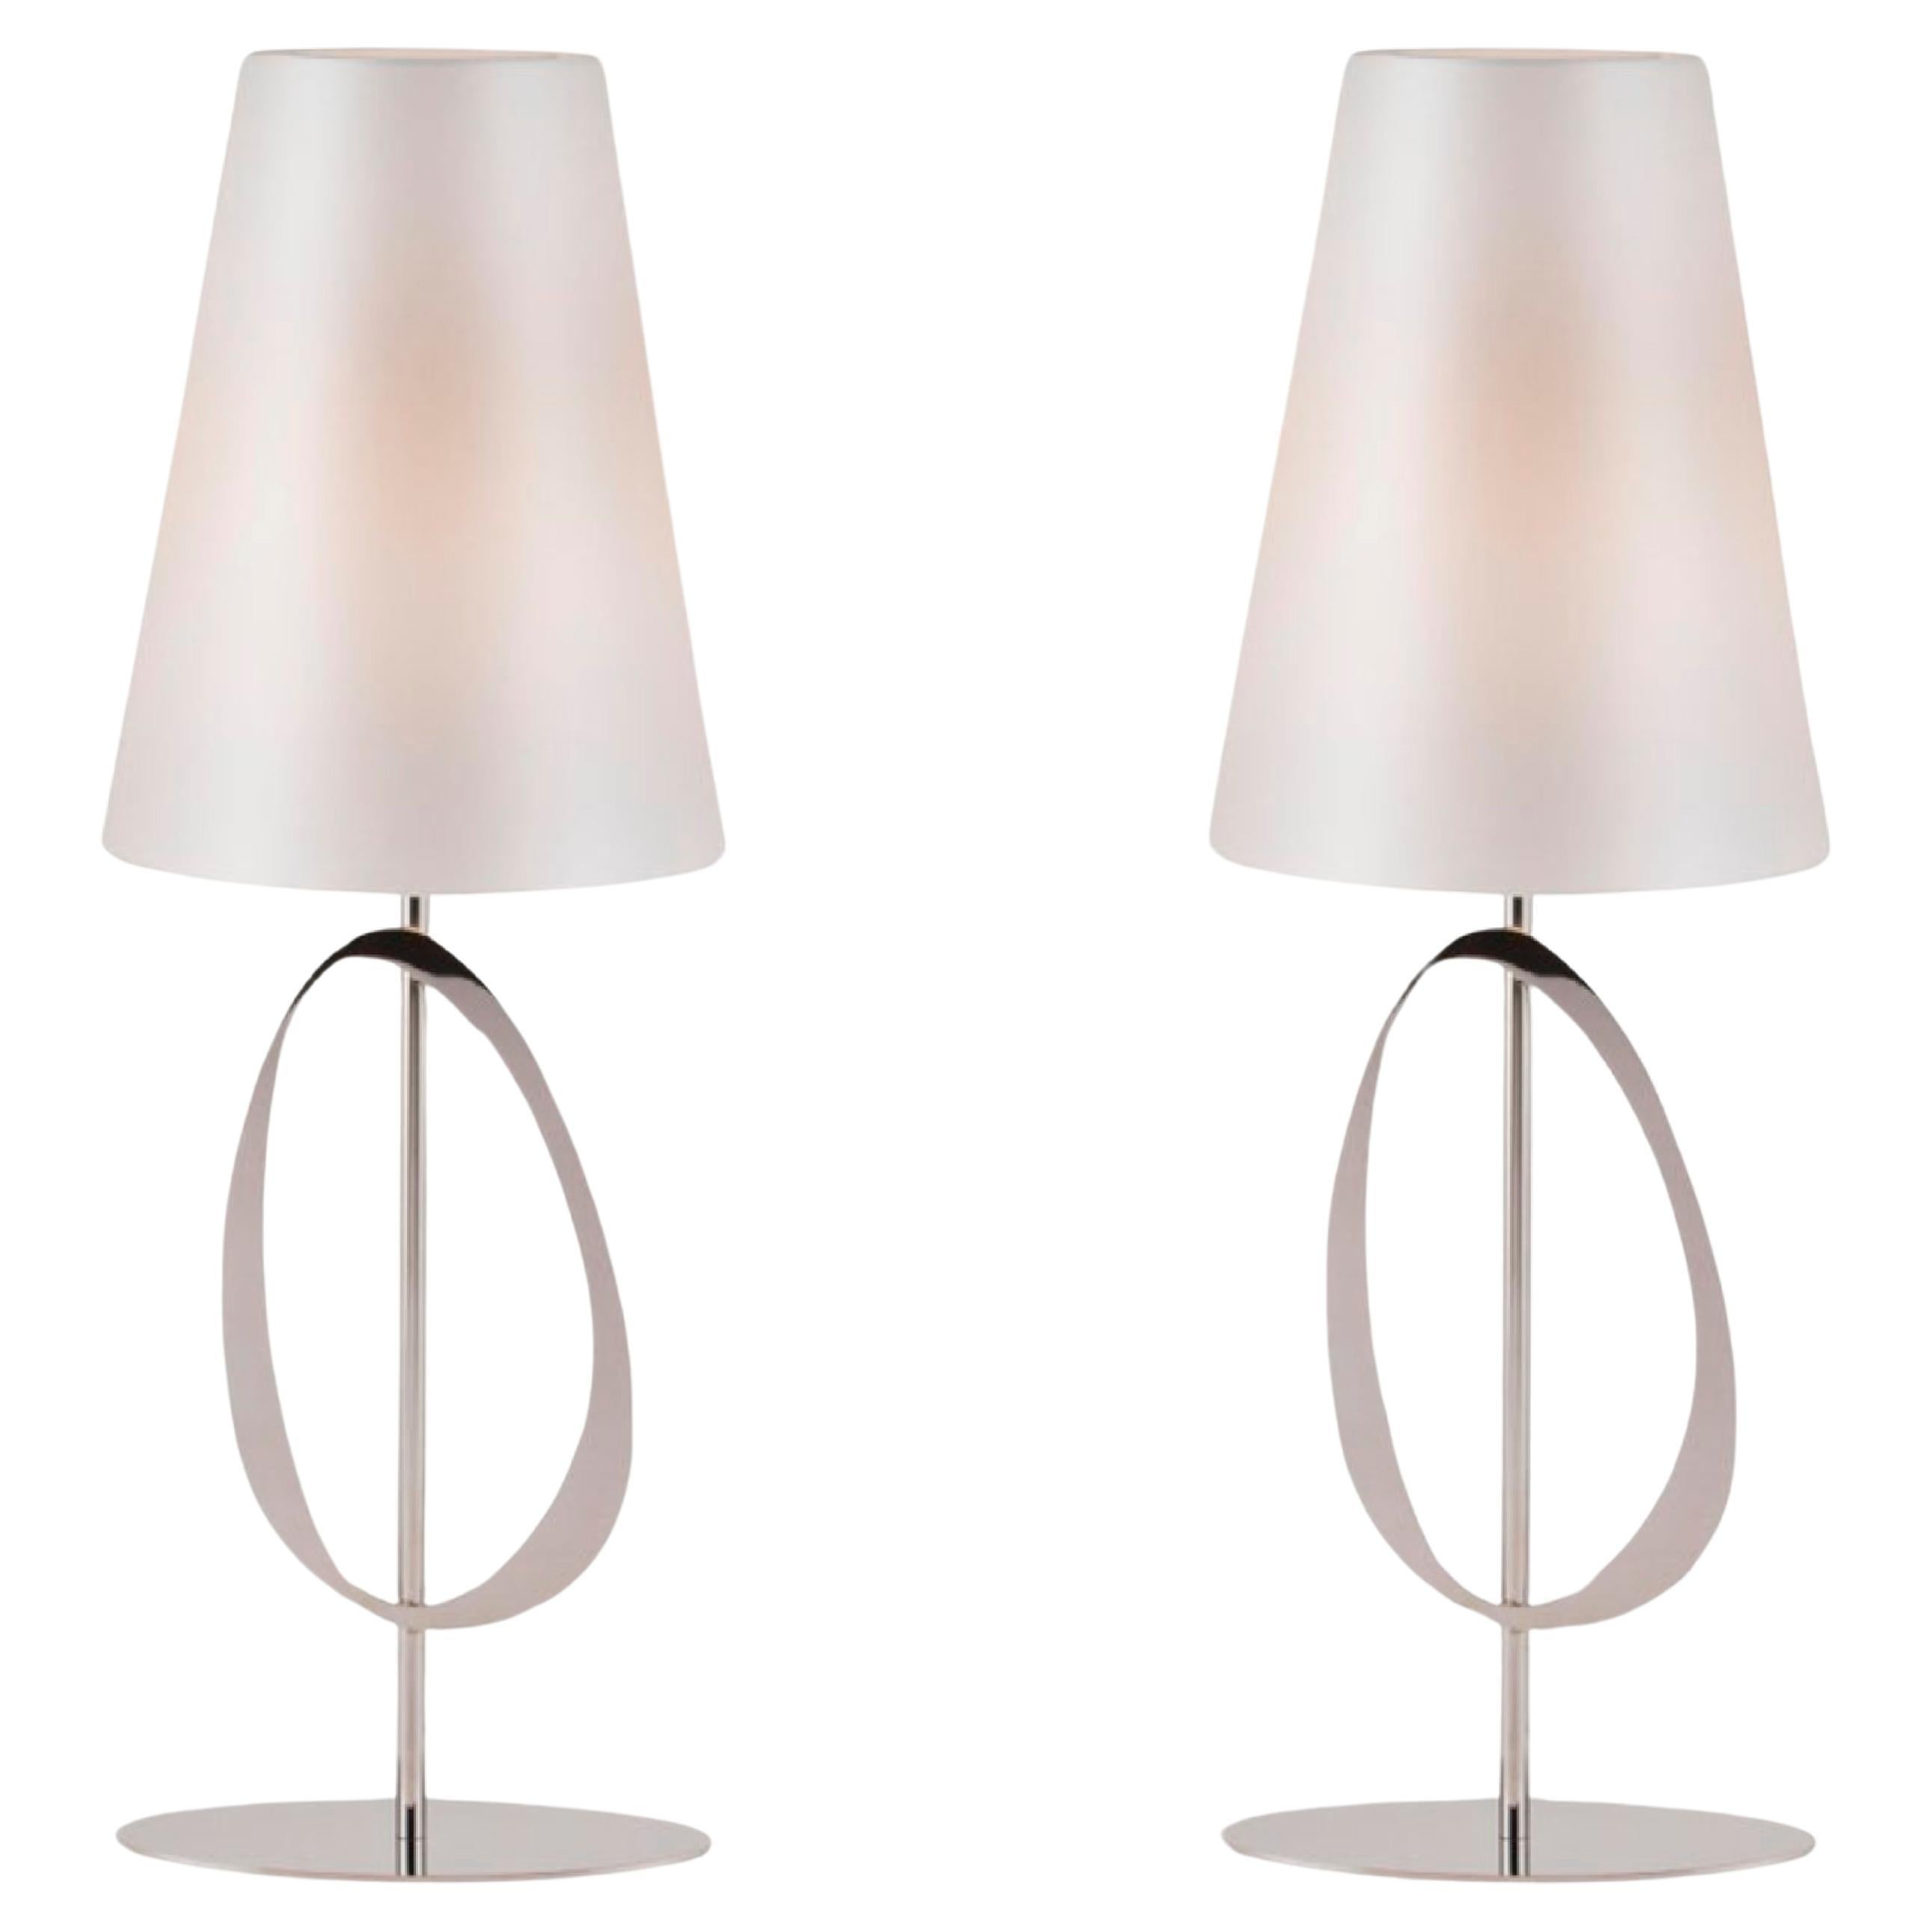 Set of 2 Modern Robin Table Lamps, Stainless, Handmade in Portugal by Greenapple